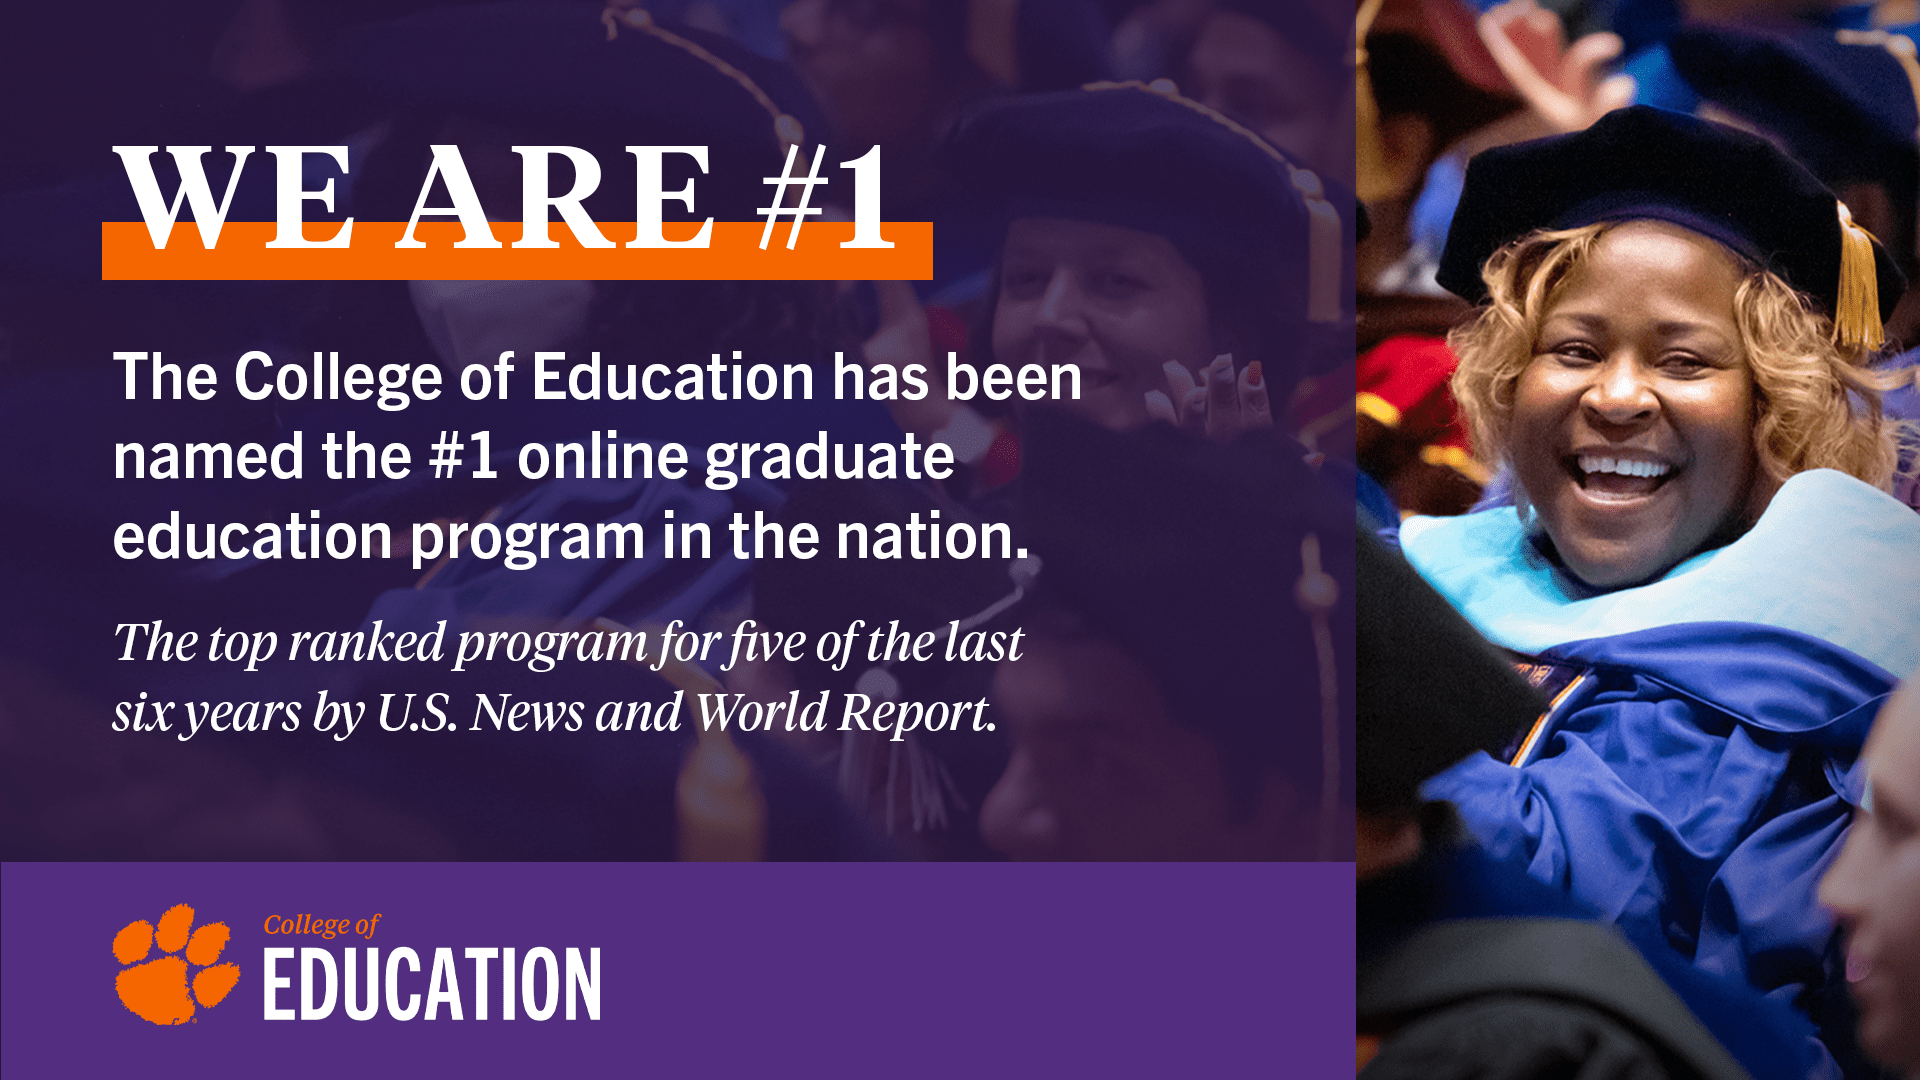 We are #1 The College of Education has been named the #1 online graduate education program in the nation. The top ranked program for five of the last six years by U.S. News and World Report.